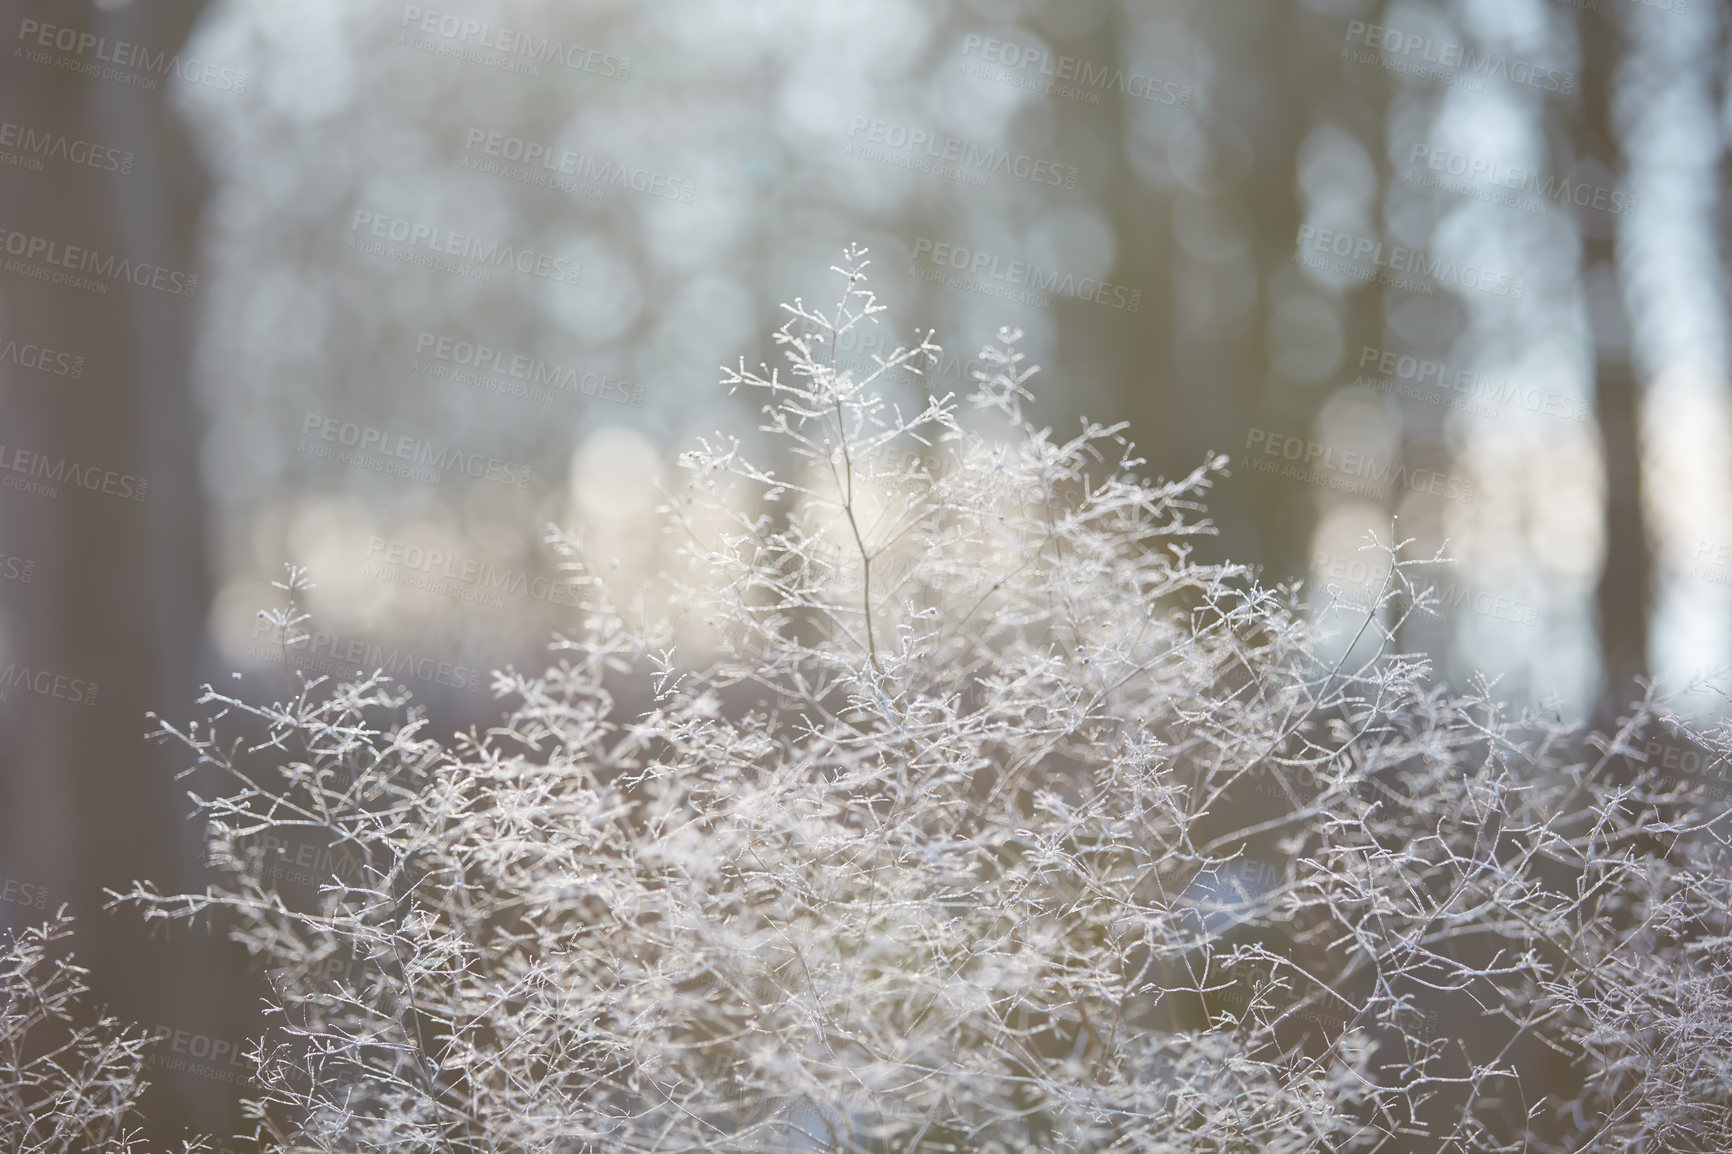 Buy stock photo Closeup view of trees and plants covered in snow during winter in Denmark. Beautiful view of a snowy and cold day in a natural environment outdoors. Greenery and vegetation frozen by freezing weather